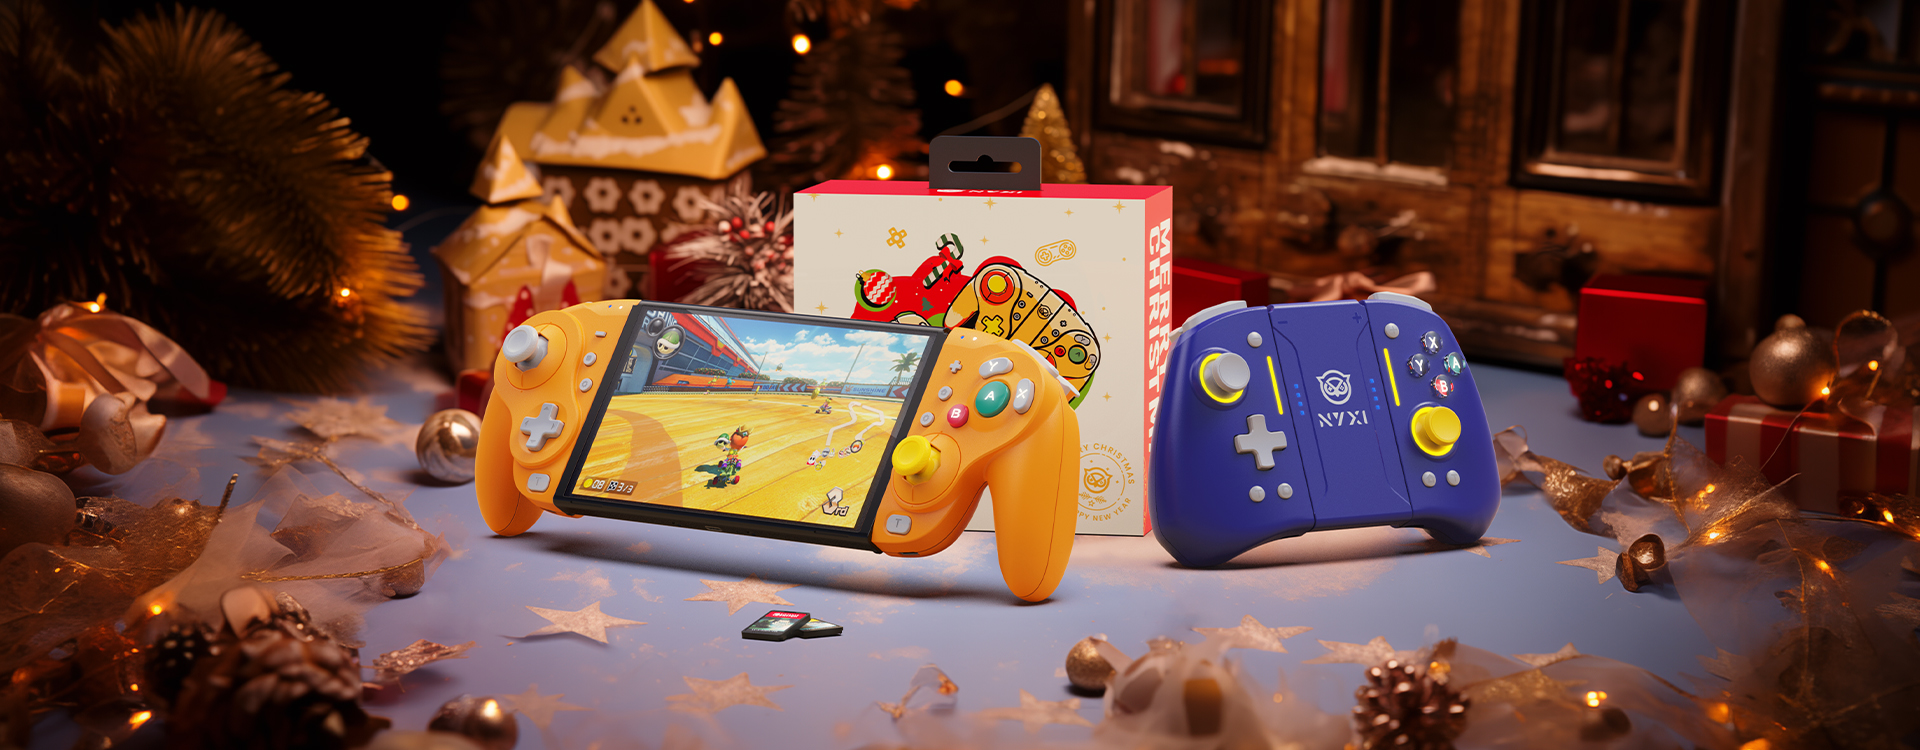 Nyxi_official on X: ‼️UNLOCK UR NEW SKIN❤️💜💛💚💙🖤 What's your favorite  color for New NYXI JOY-PADS?🎮 Leave your answer in the comments.⤵️ Maybe  it is coming 🔜 #controllers #joypads #joycons #switchcontroller  #animalcrossing #LegendofZelda #